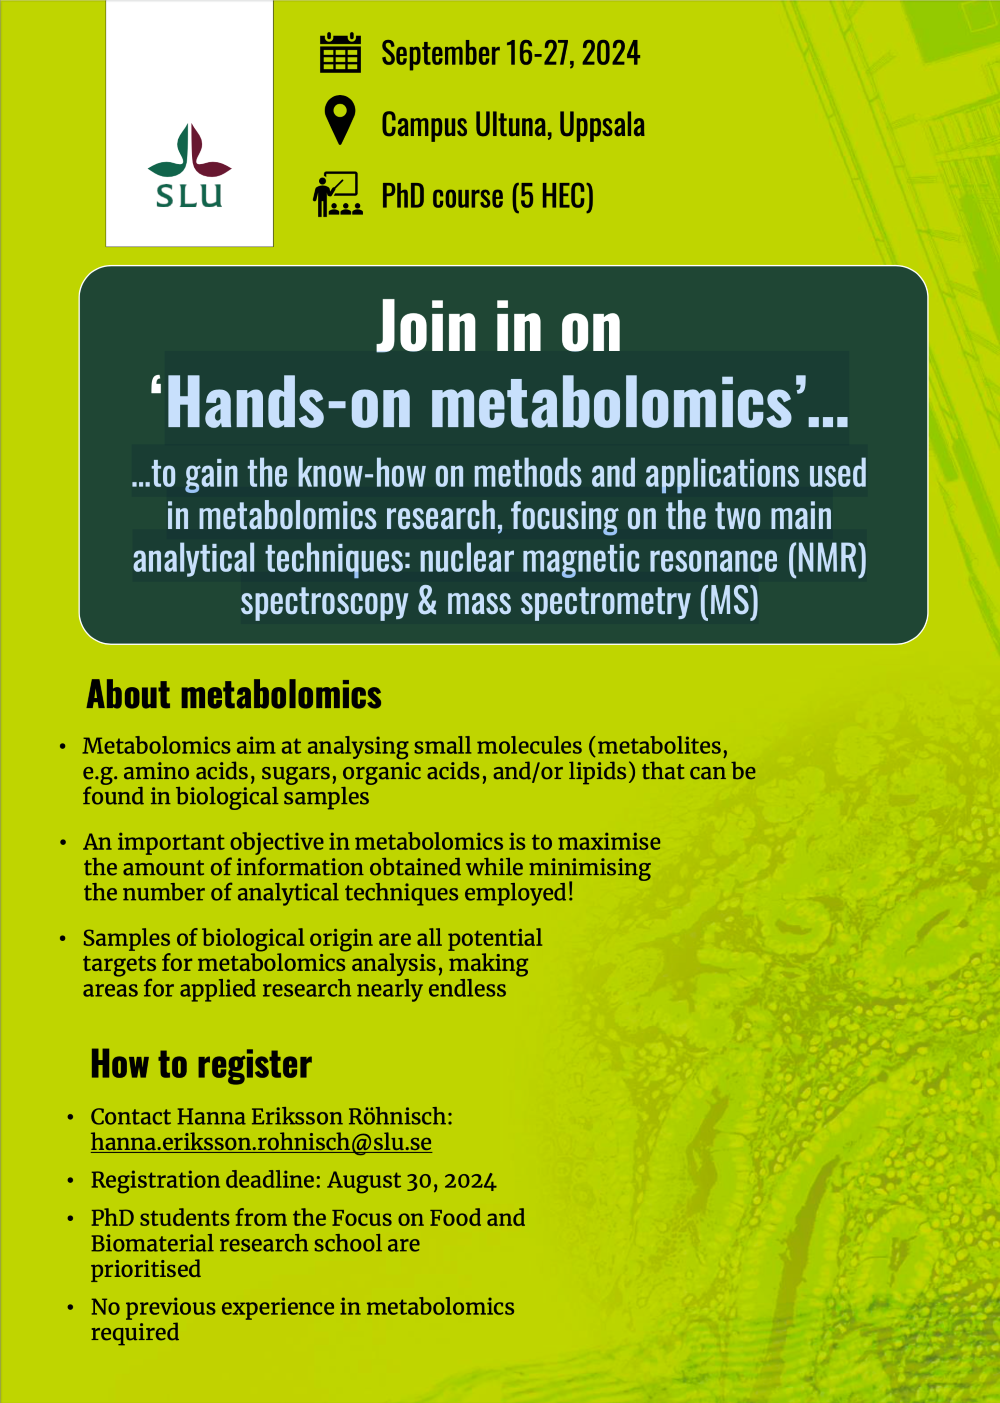 Course flyer for Hands-on metabolmics